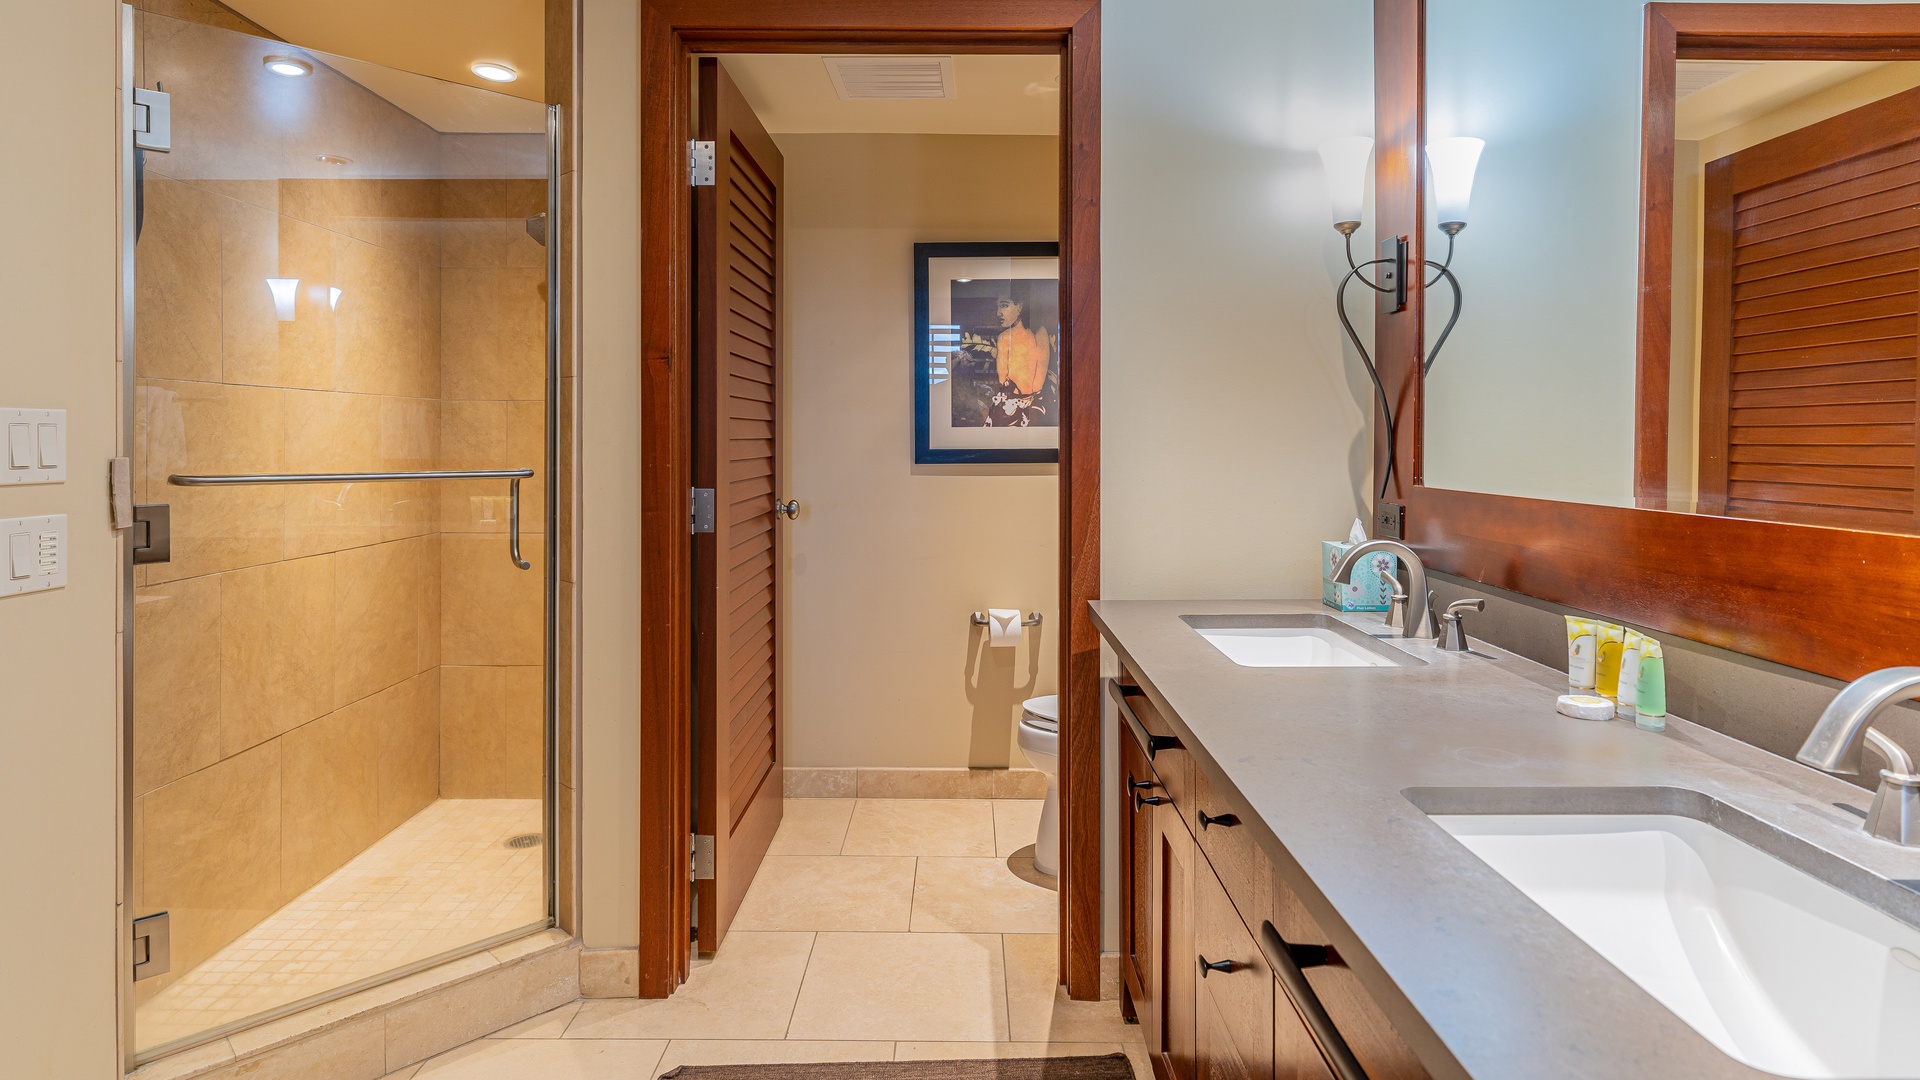 Kapolei Vacation Rentals, Ko Olina Beach Villas B706 - The primary guest bathroom with a walk-in shower.